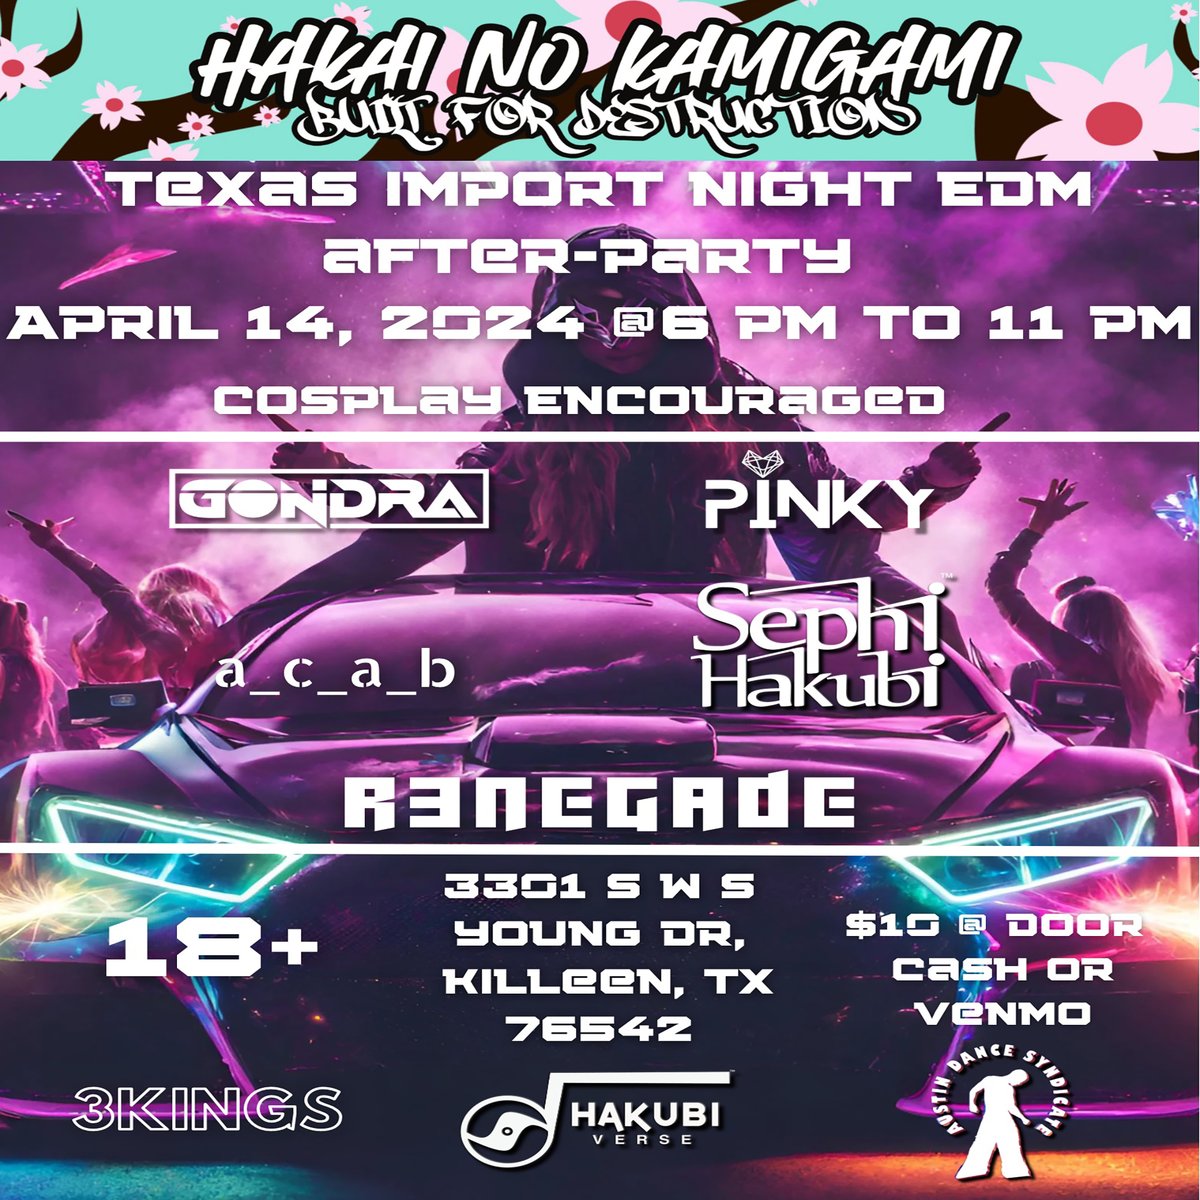 Sunday night in Killeen, Texas, the #HakubiVerse will be at the Killen Special Events Center to team up with 3Kings and Austin Dance Syndicate for Texas Import Night's Official After-Party. @SephiHakubi will make his return to Killen after 8 years (since CTC Geekfest 2016).